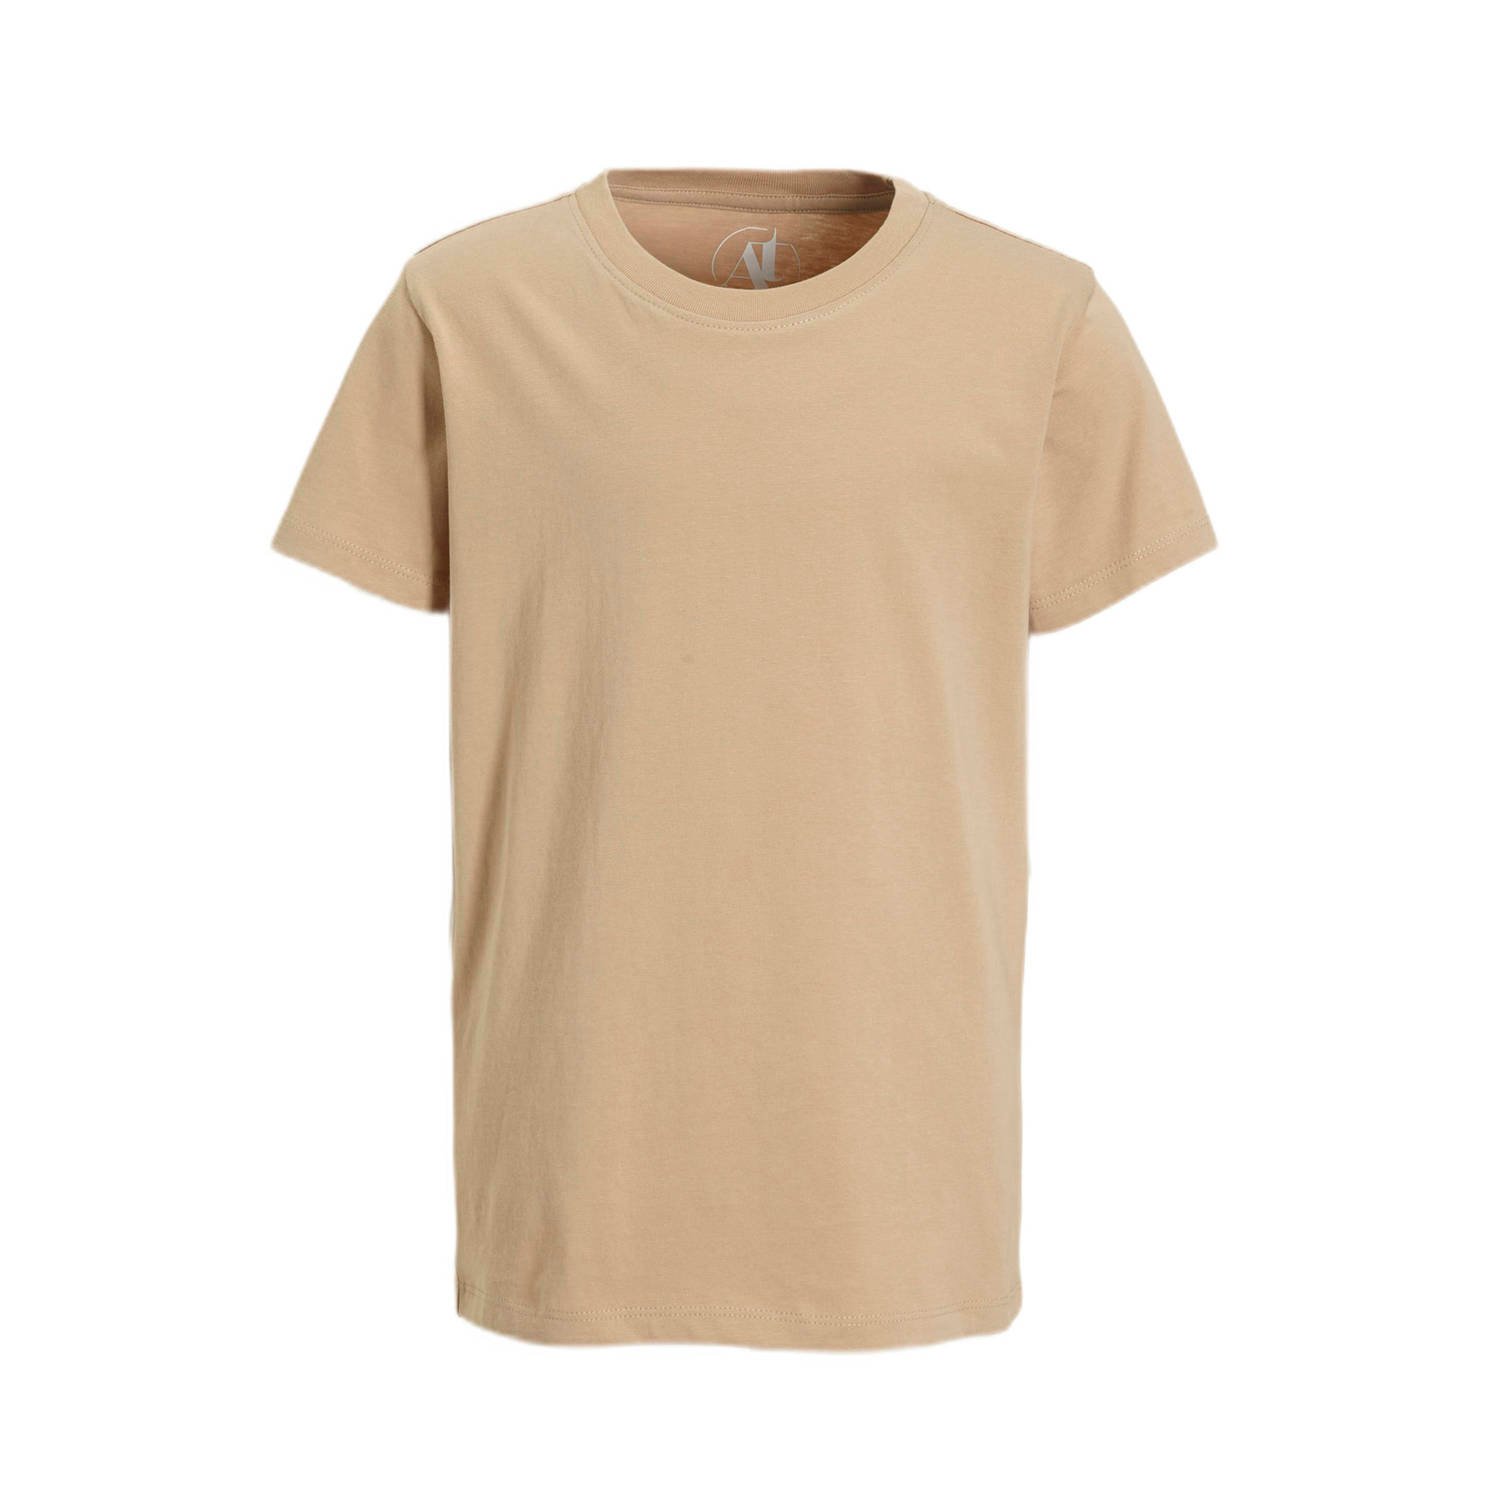 anytime T-shirt beige